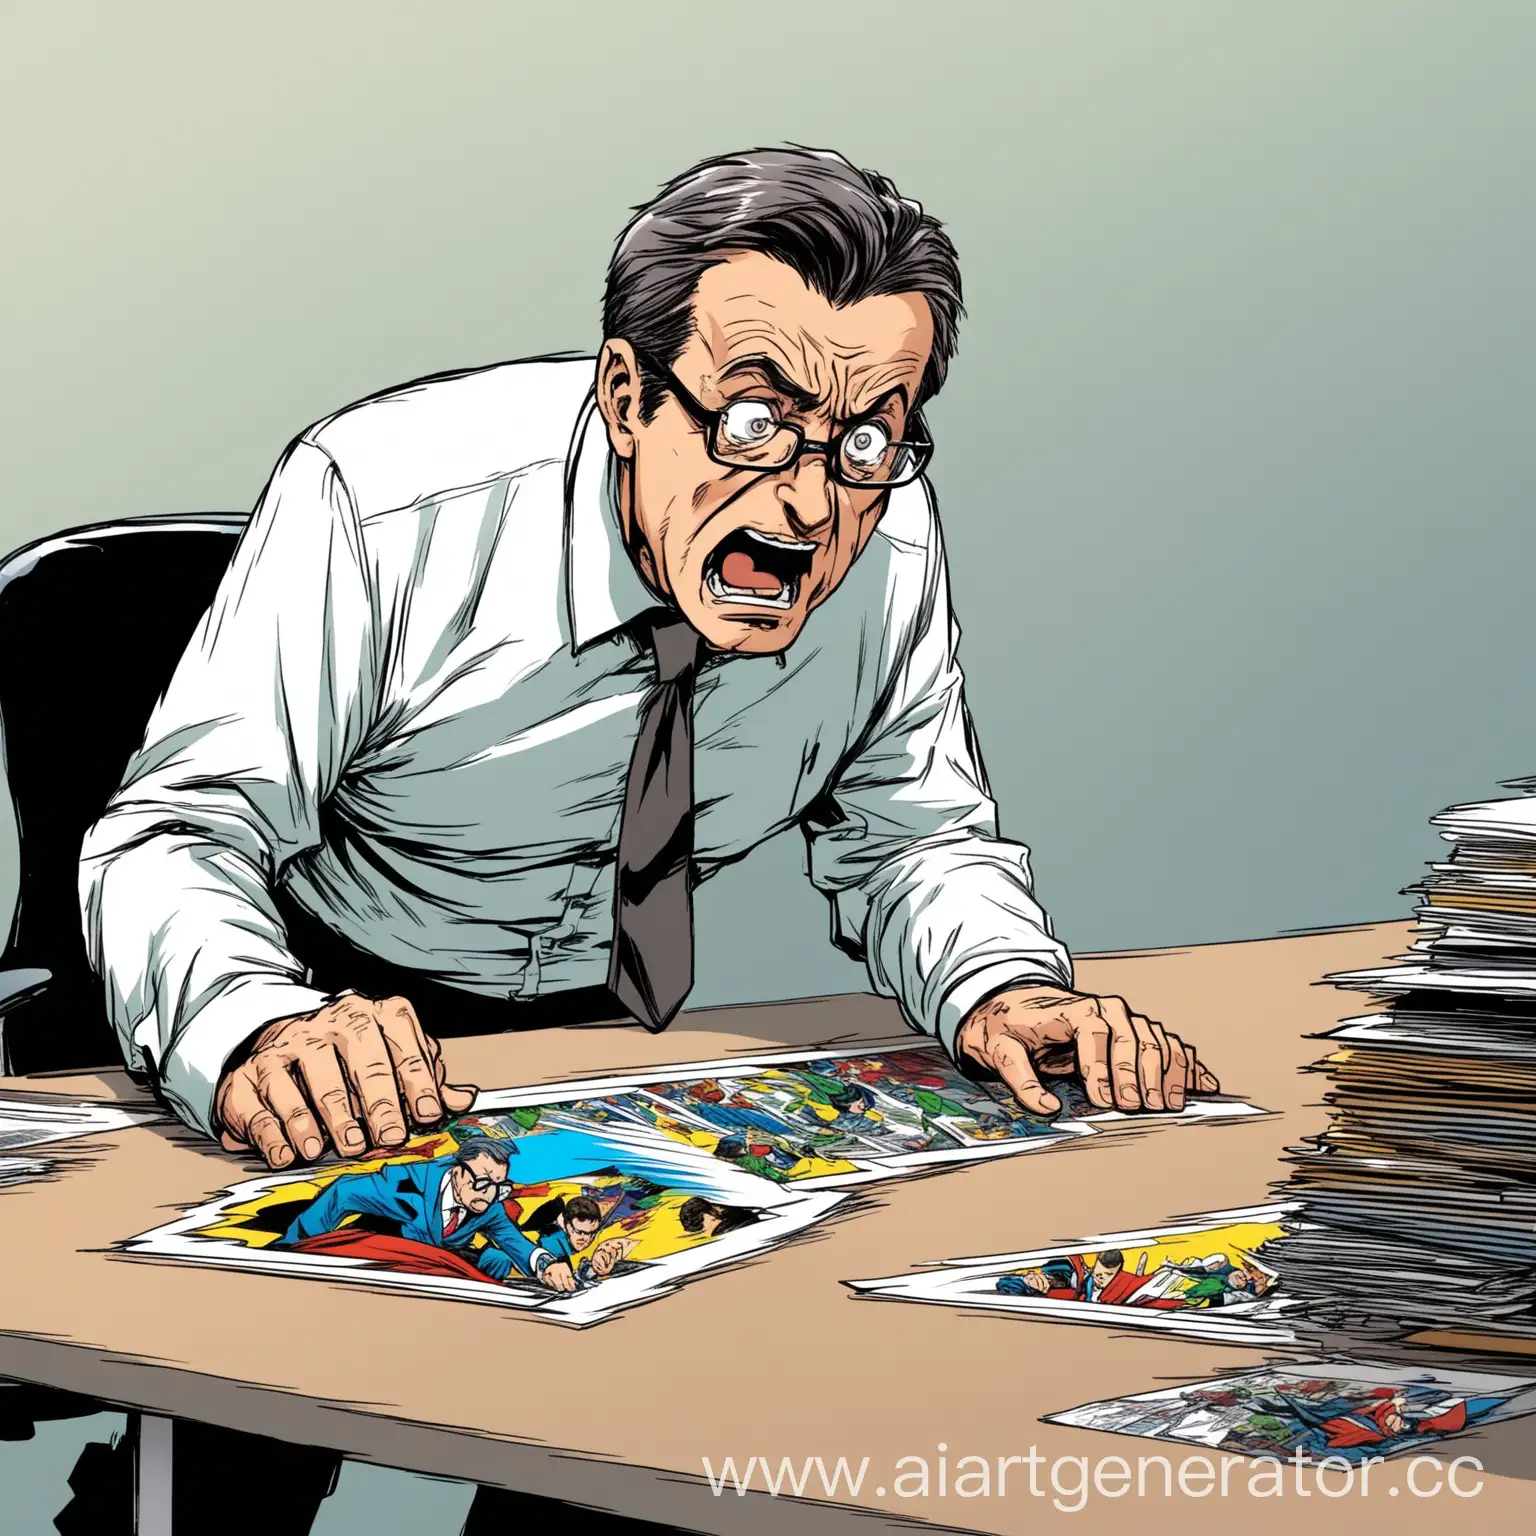 a man in an office with middle-aged glasses is pestering from a chair, with his hands on the table, dissatisfied, in office clothes, in the style of a colored comic book. without artifacts, with elaboration